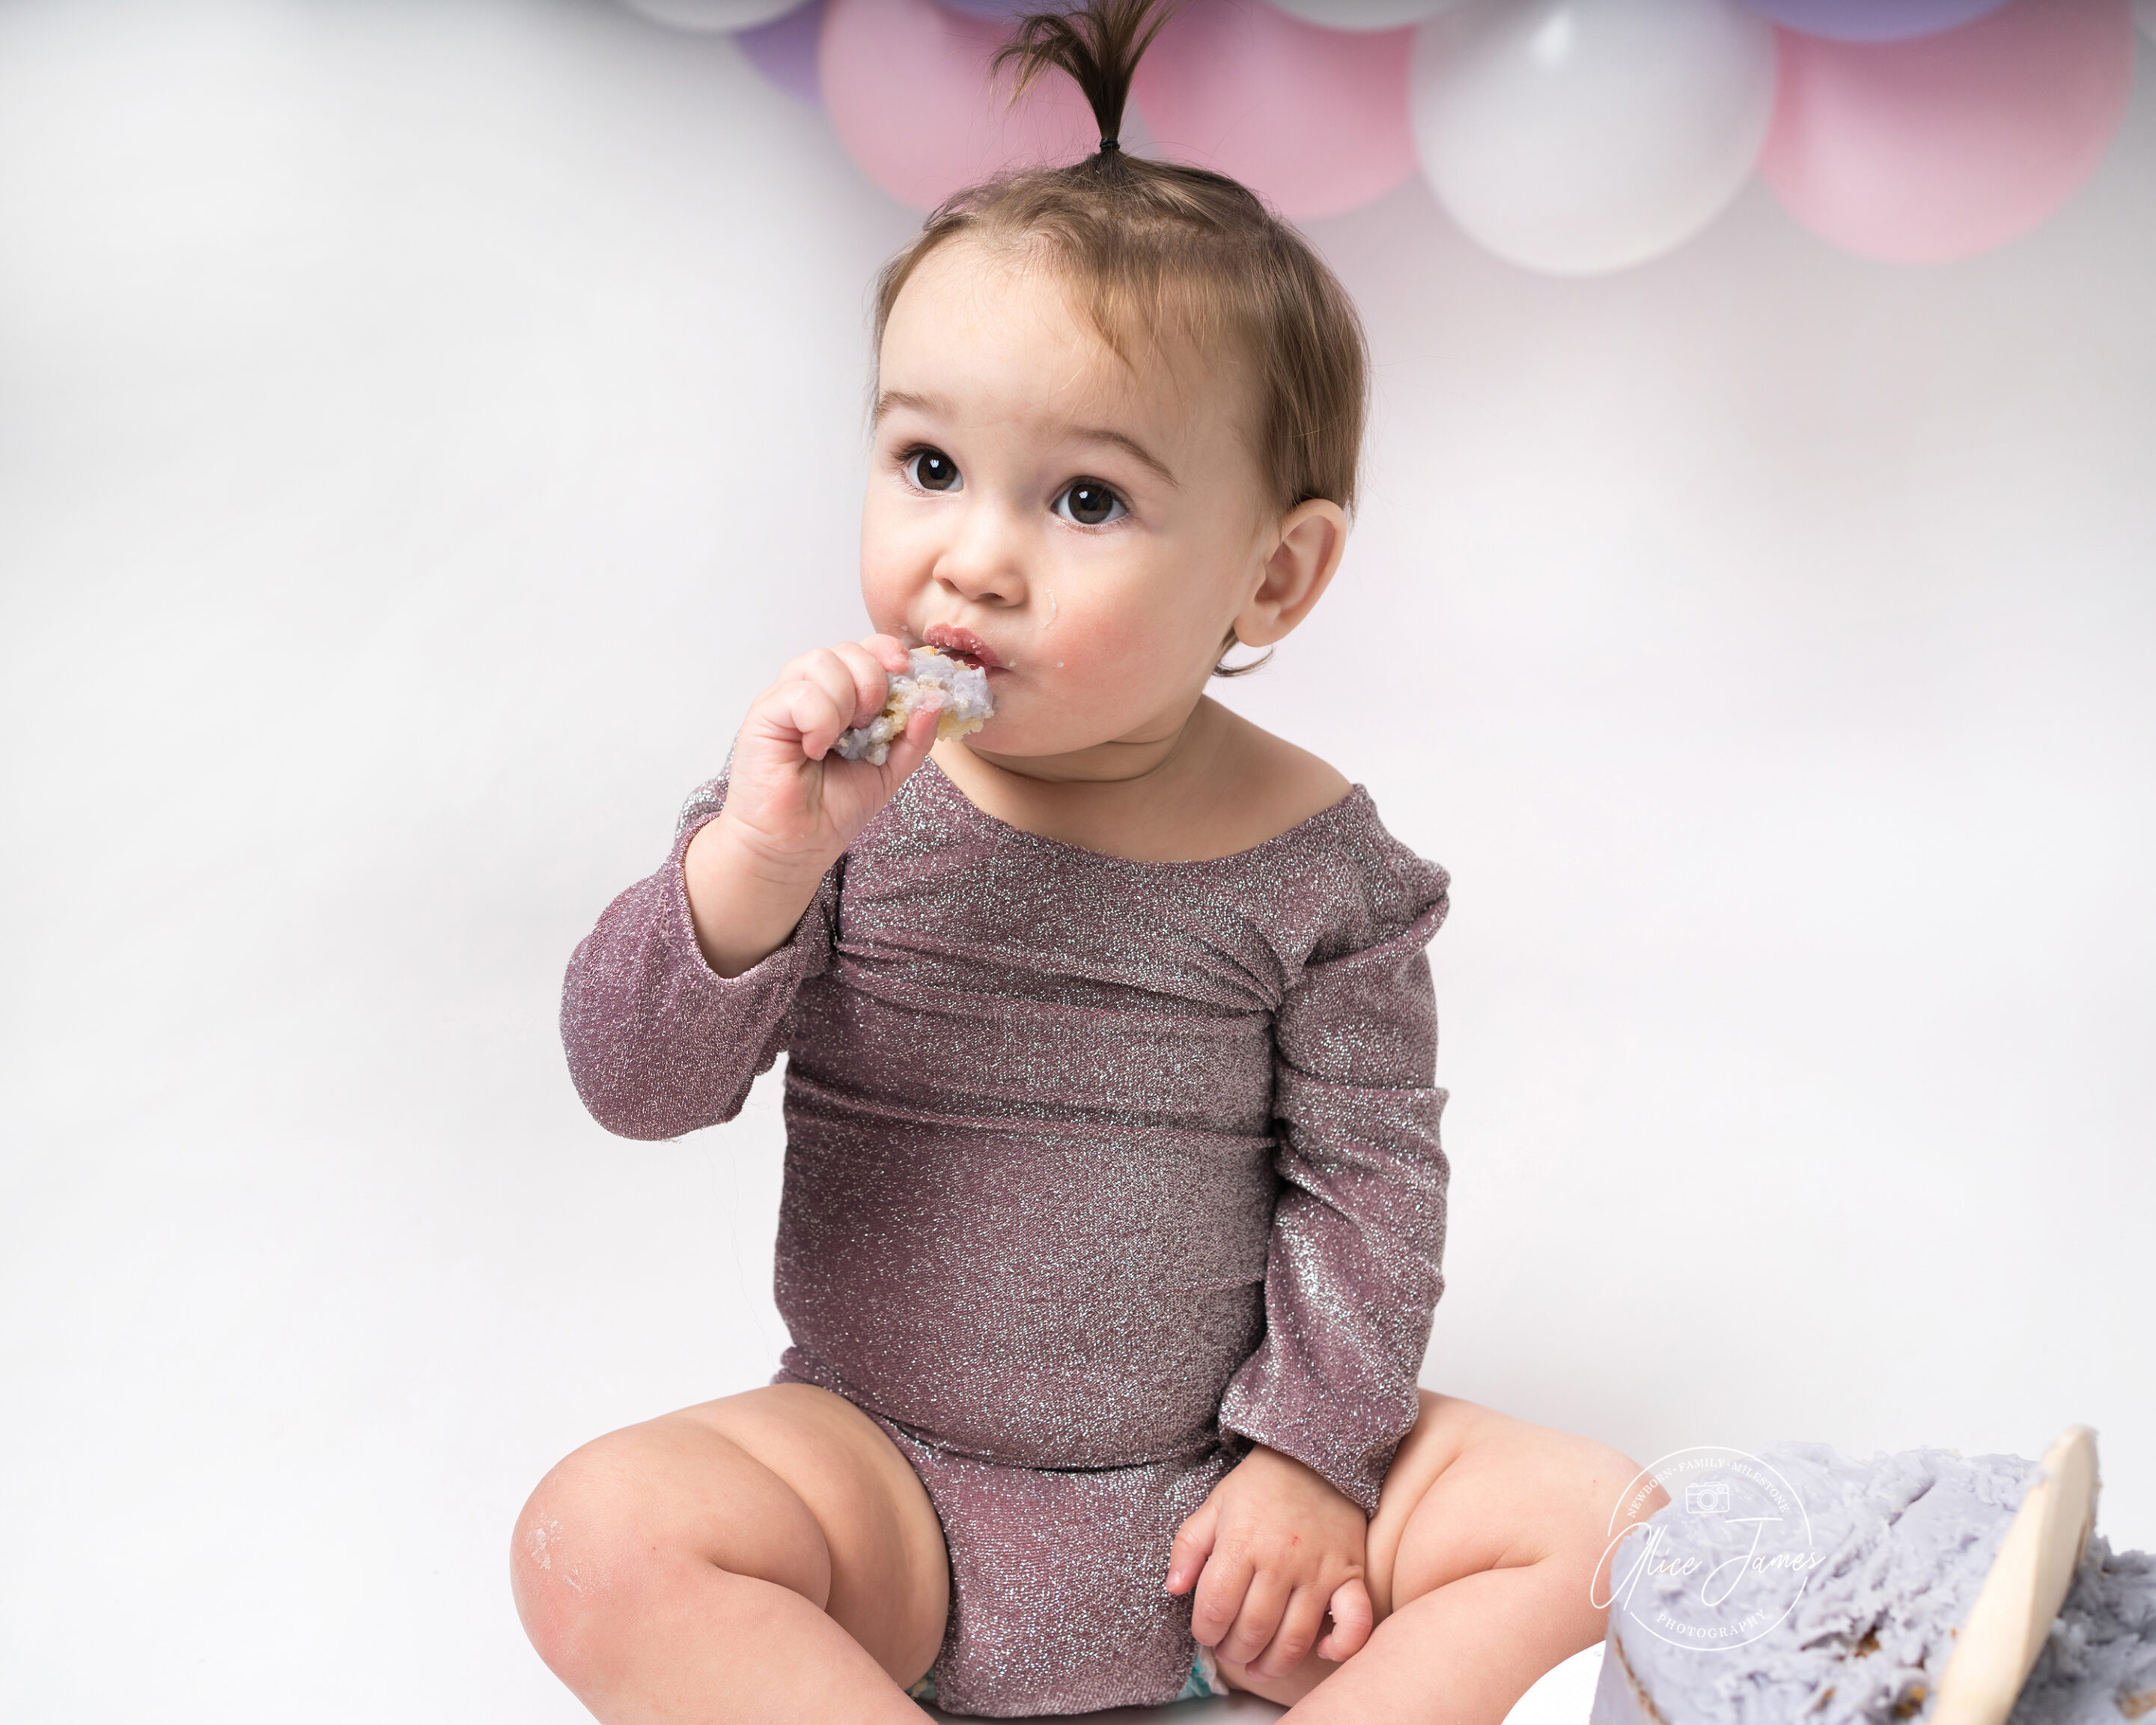 Baby girl eating cake off a wooden spoon. Taken at a cake smash photoshoot in Hitchin.